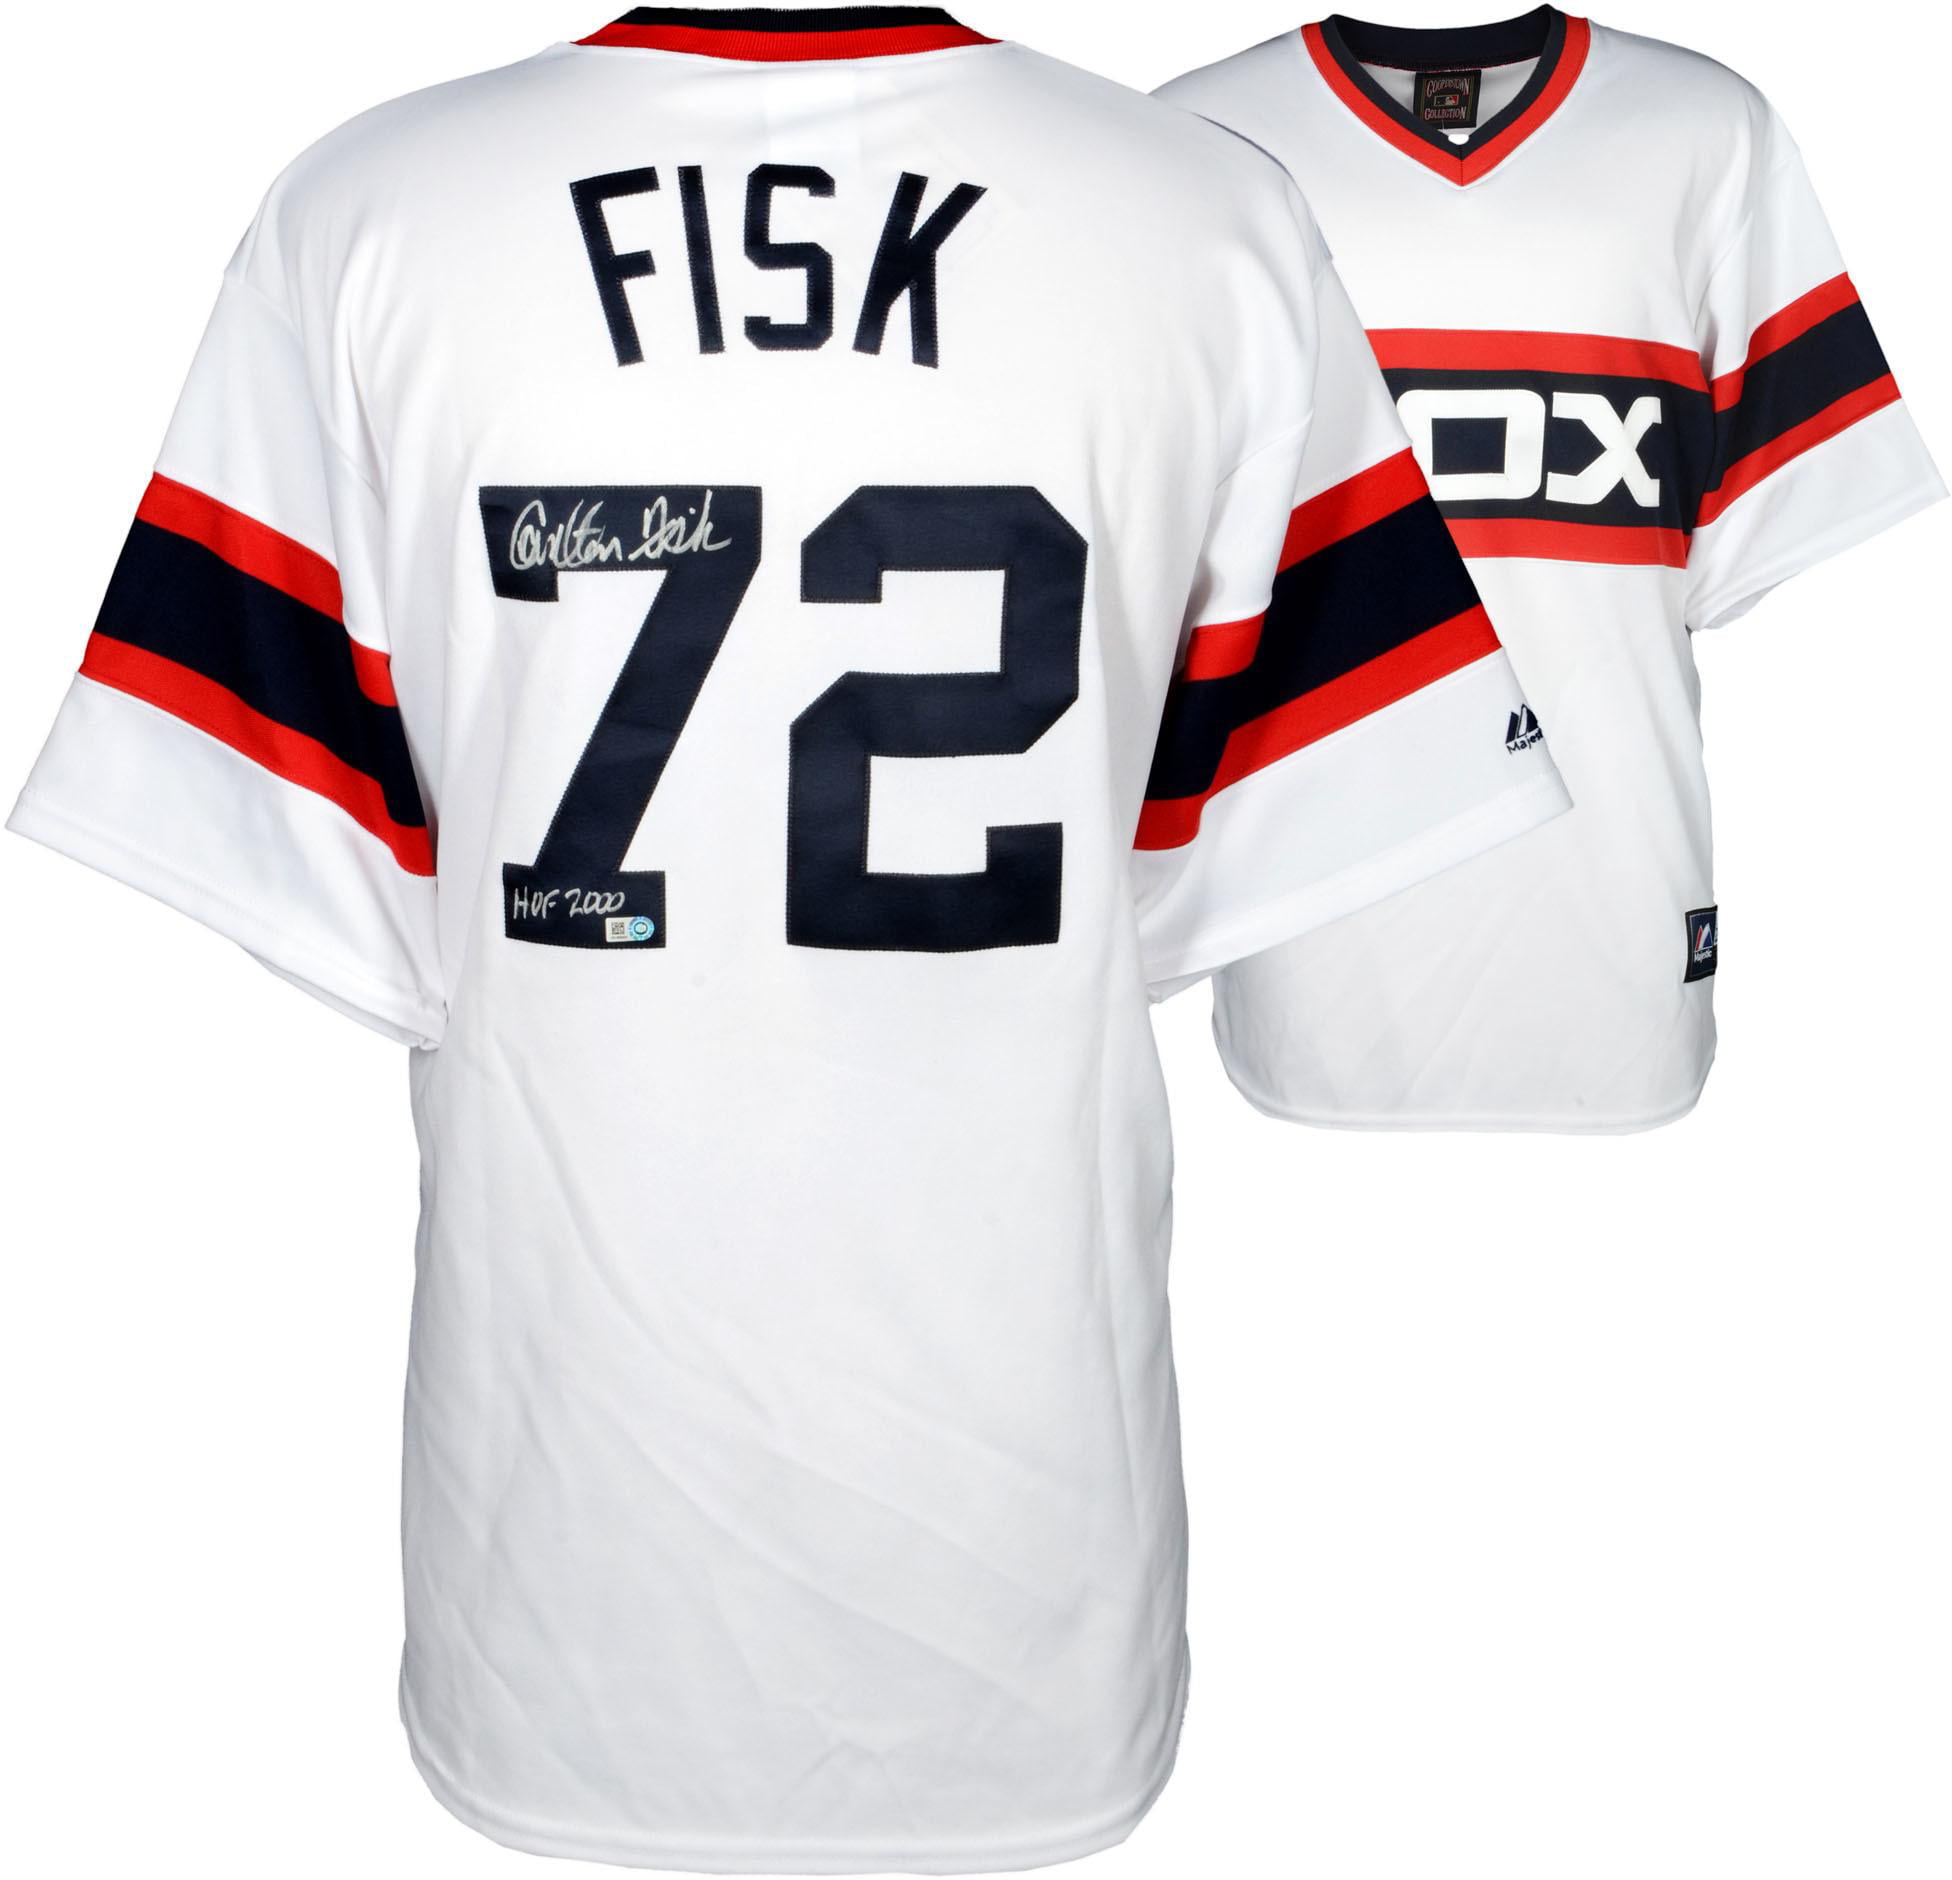 Carlton Fisk Chicago White Sox Autographed Majestic Throwback White Jersey with \u0026quot;HOF 2000 ...